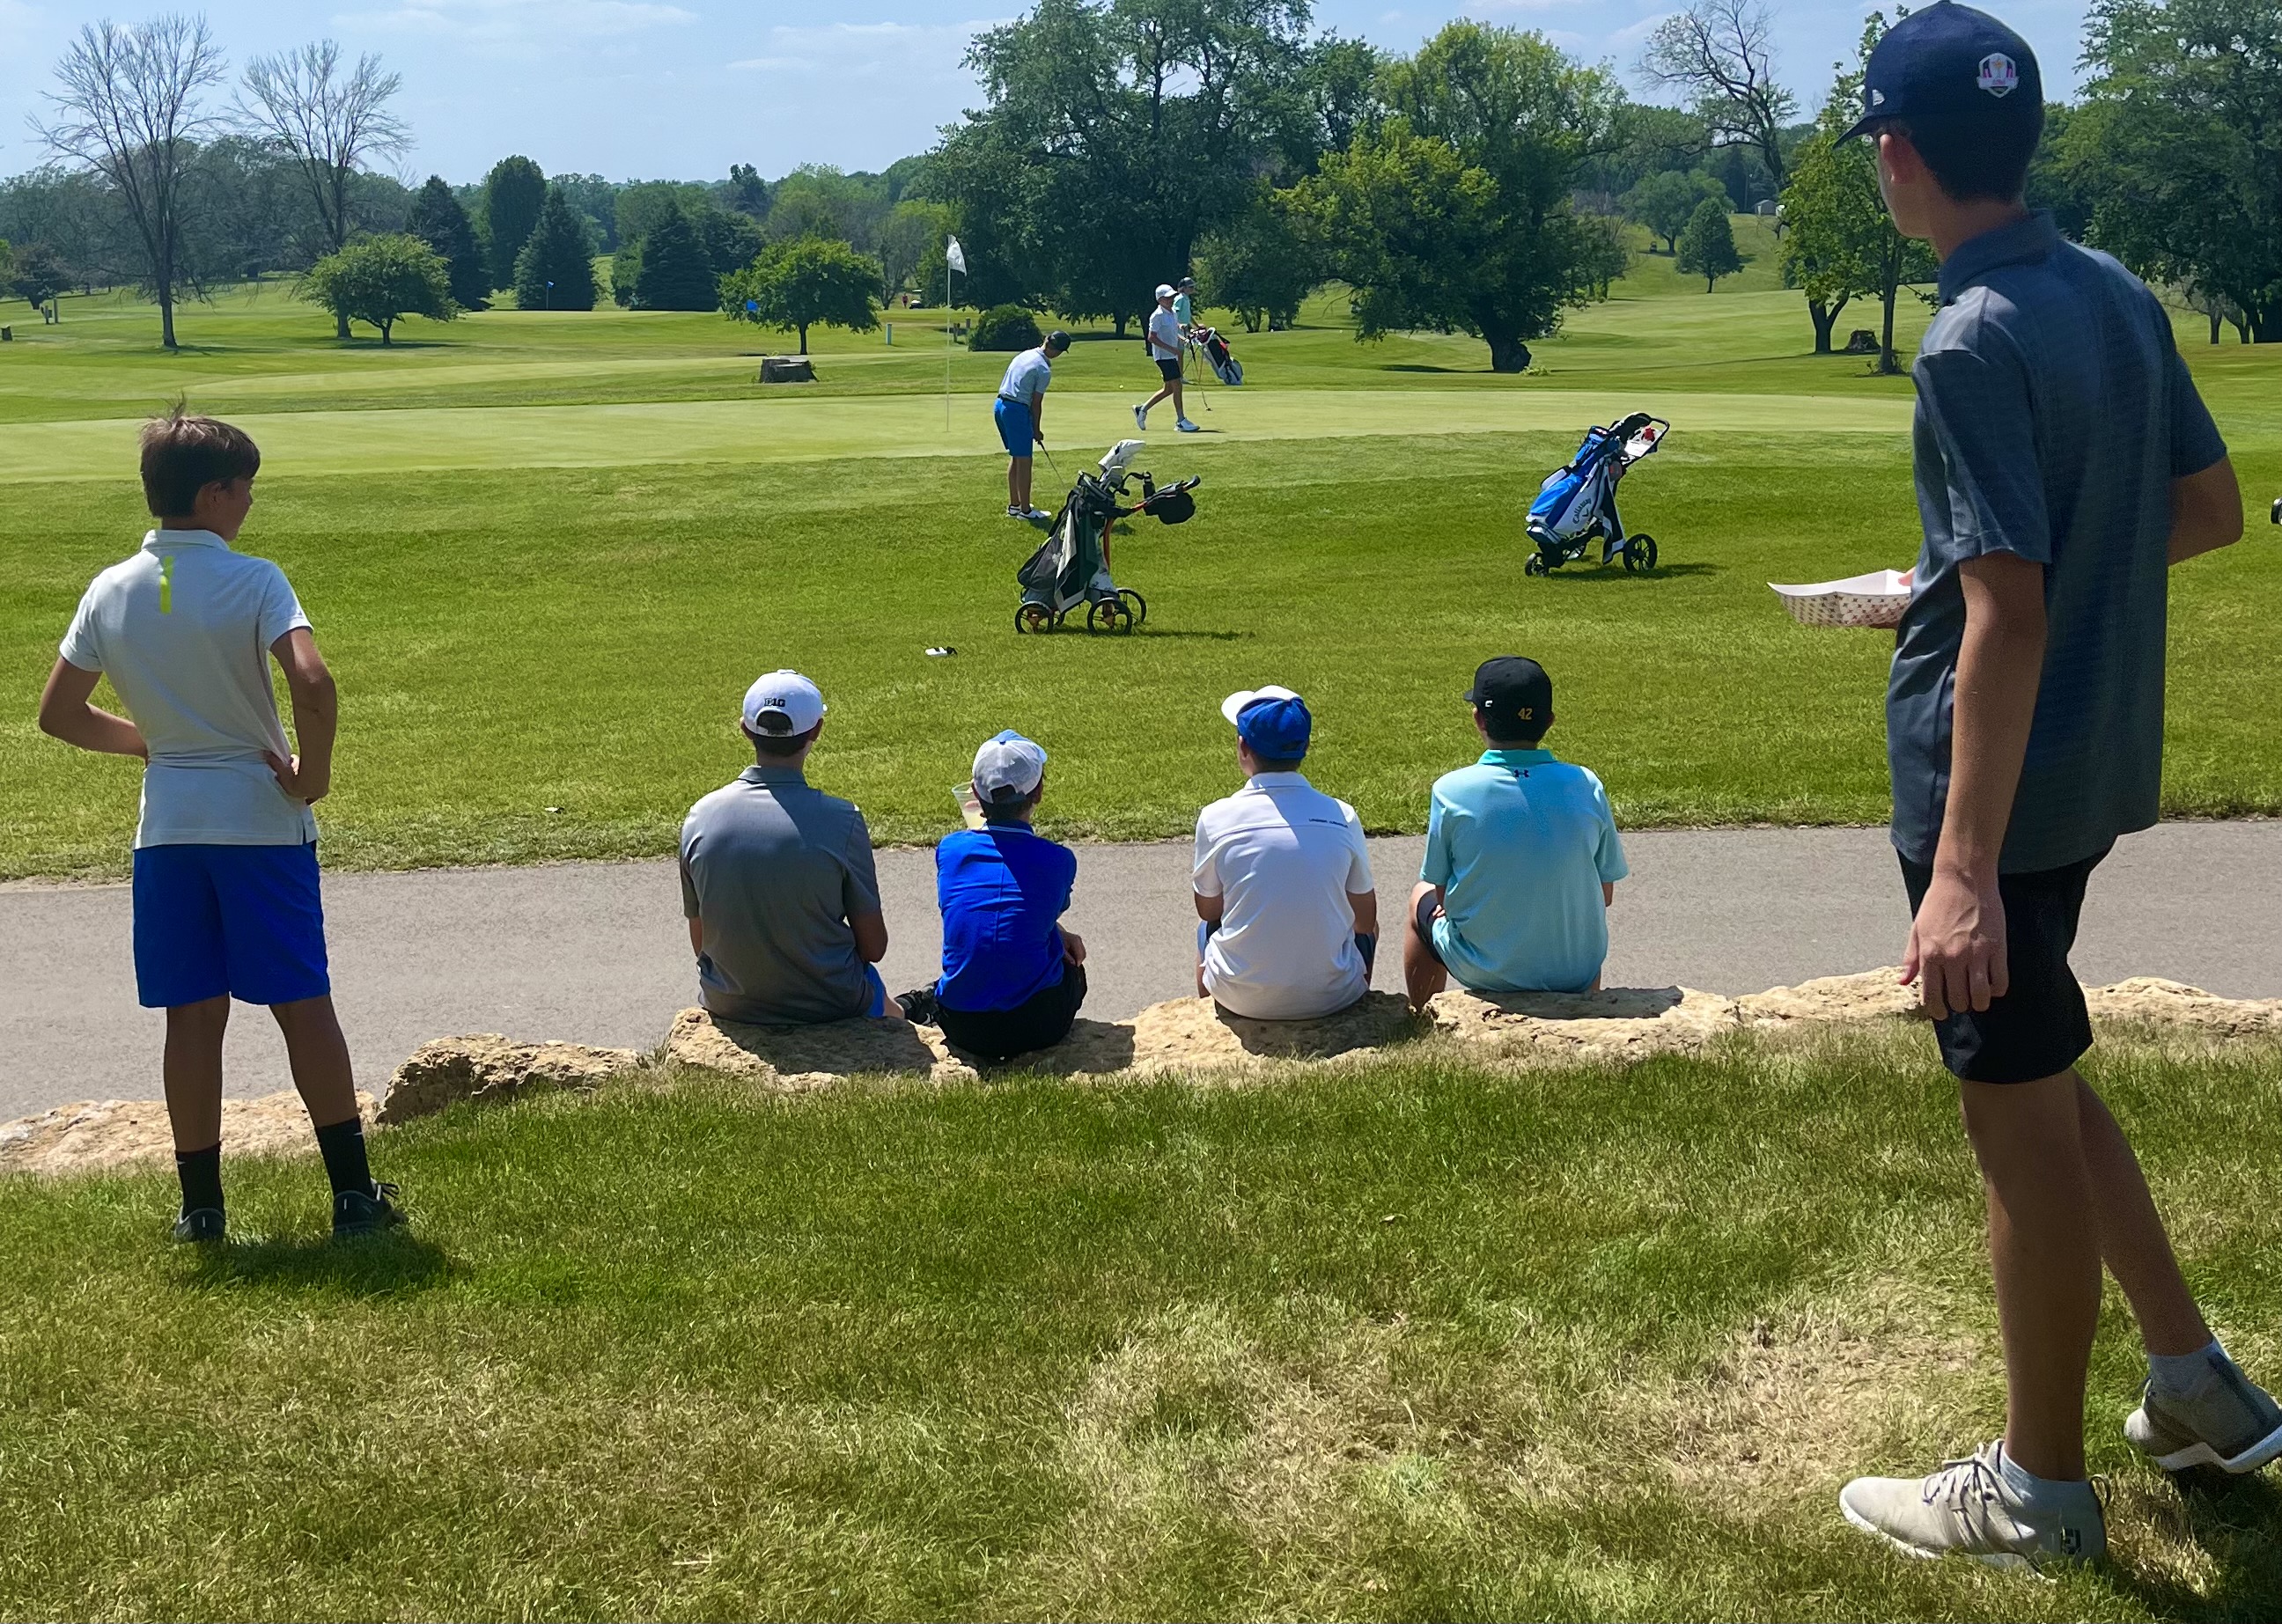 Boys 12-13 division watching the final group on the green